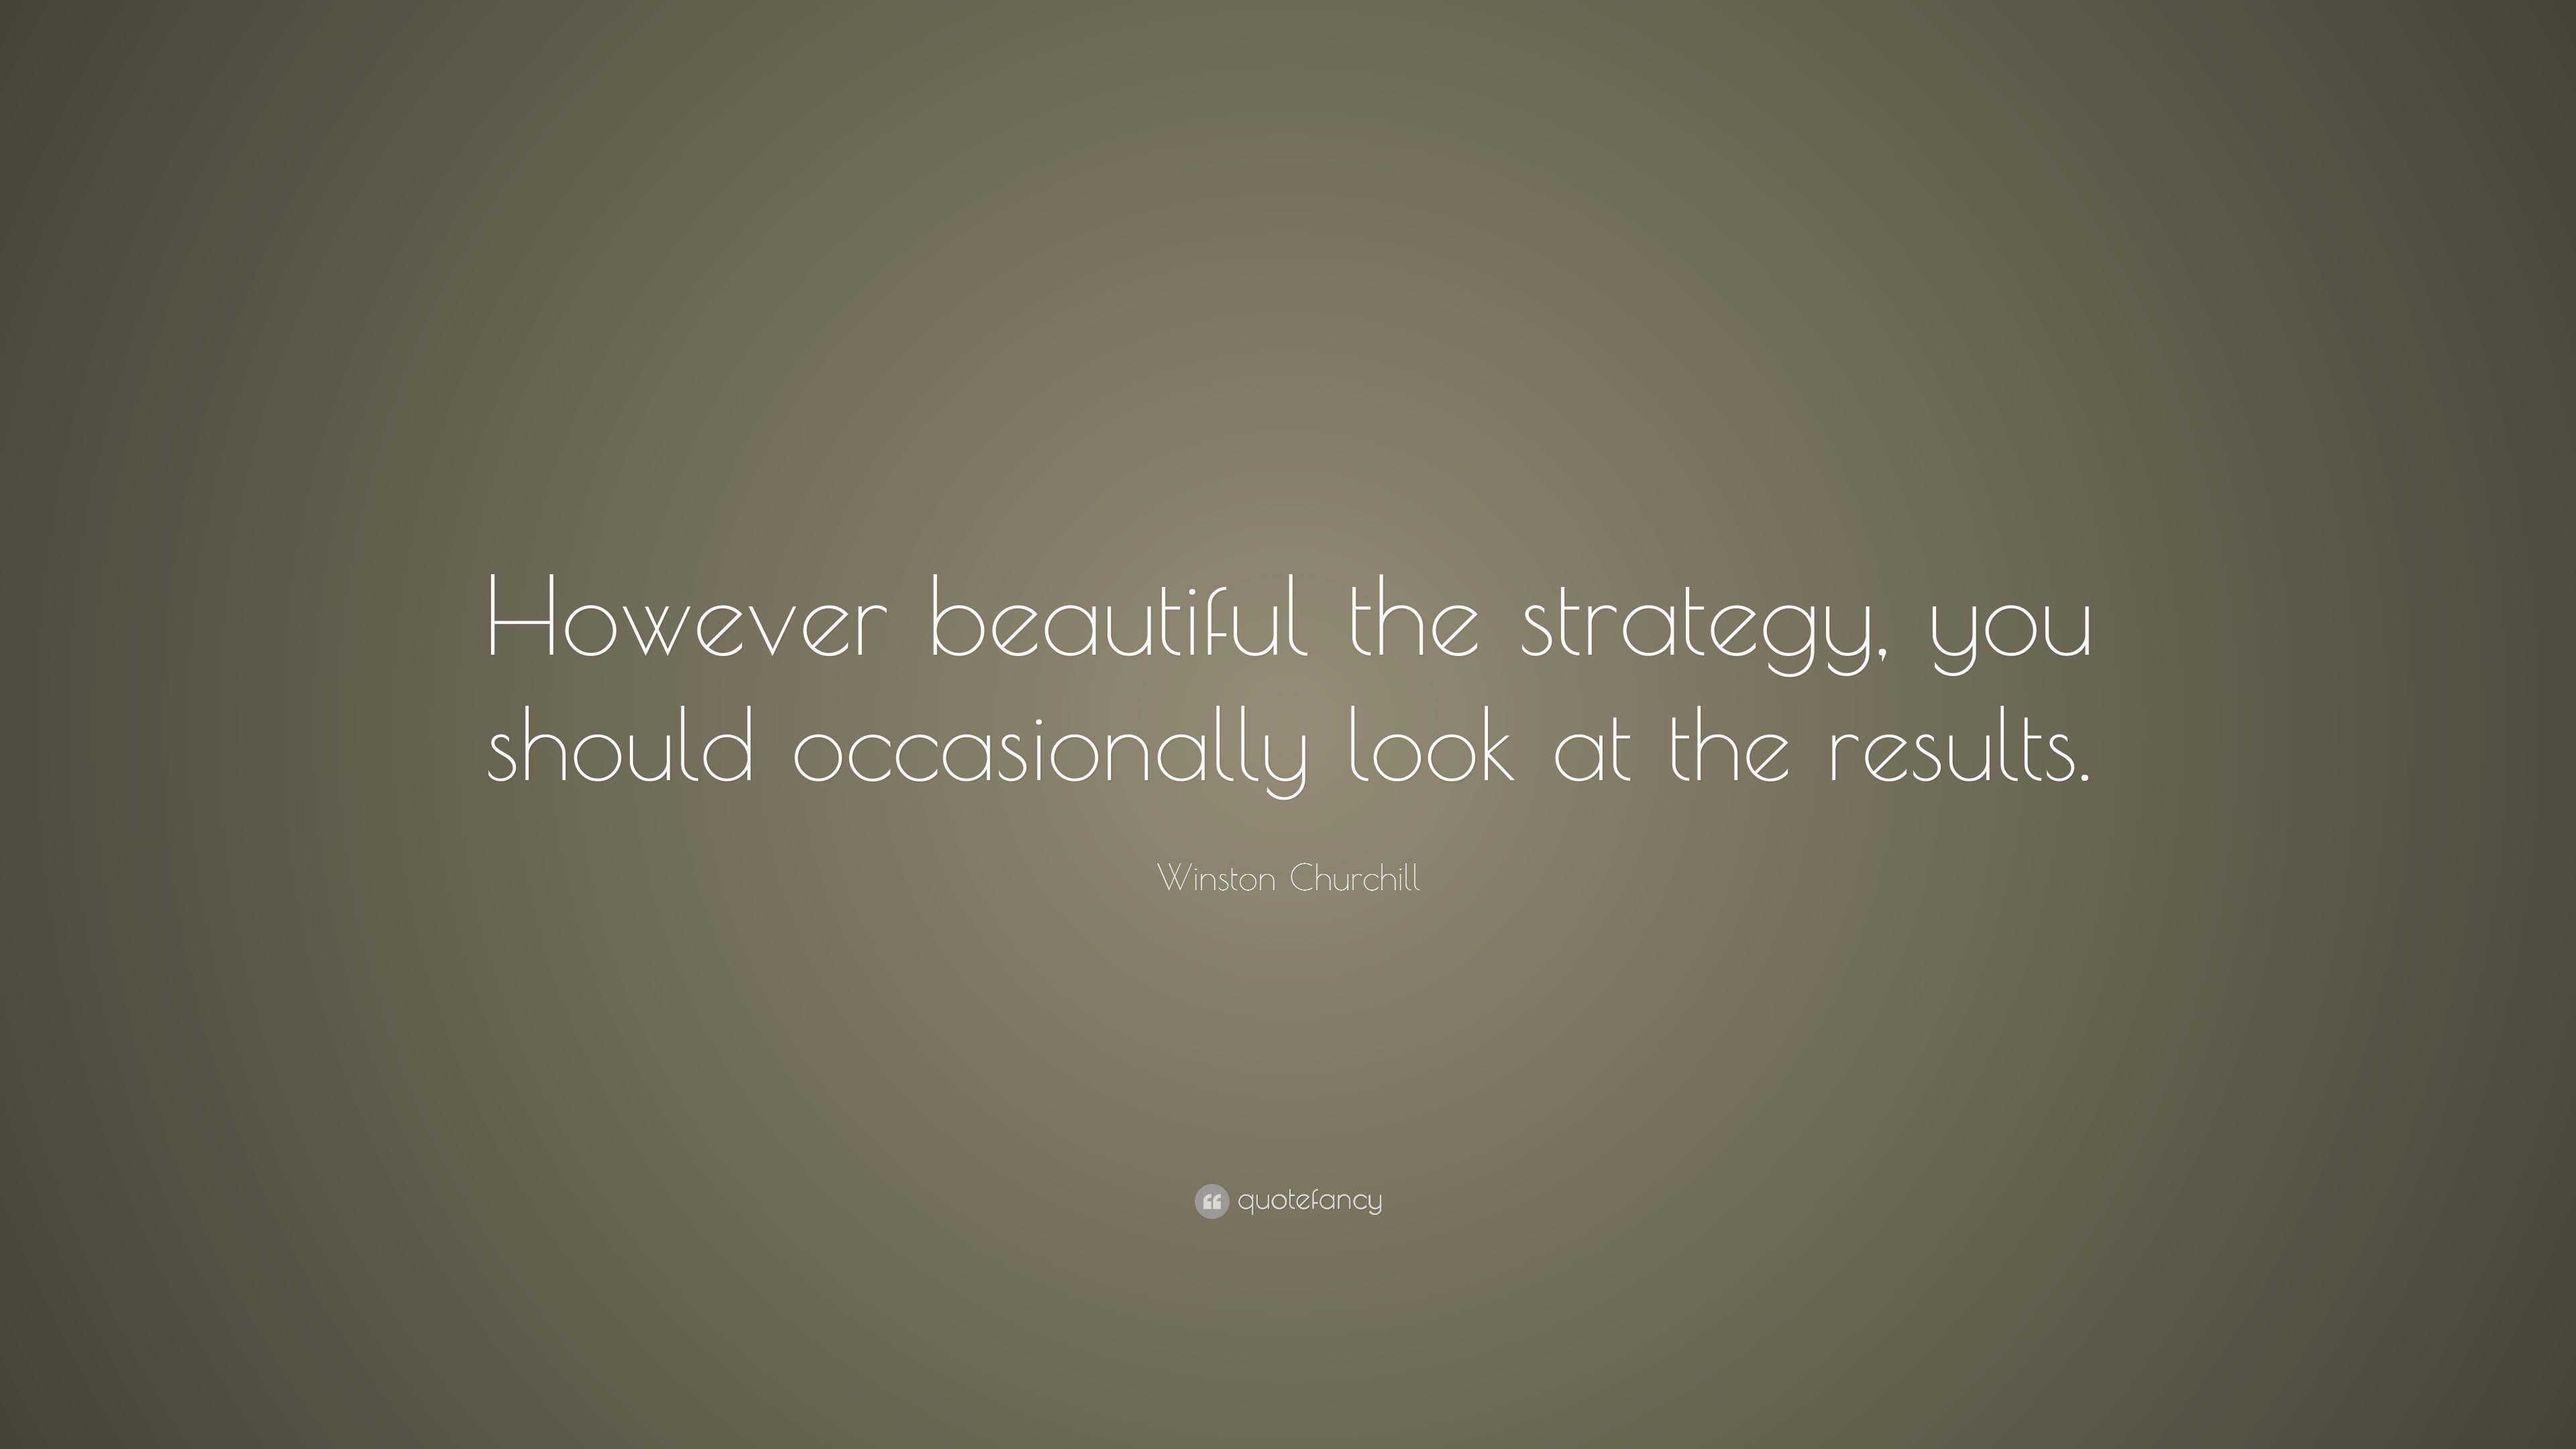 "however beautiful the strategy, you should occasionally look at